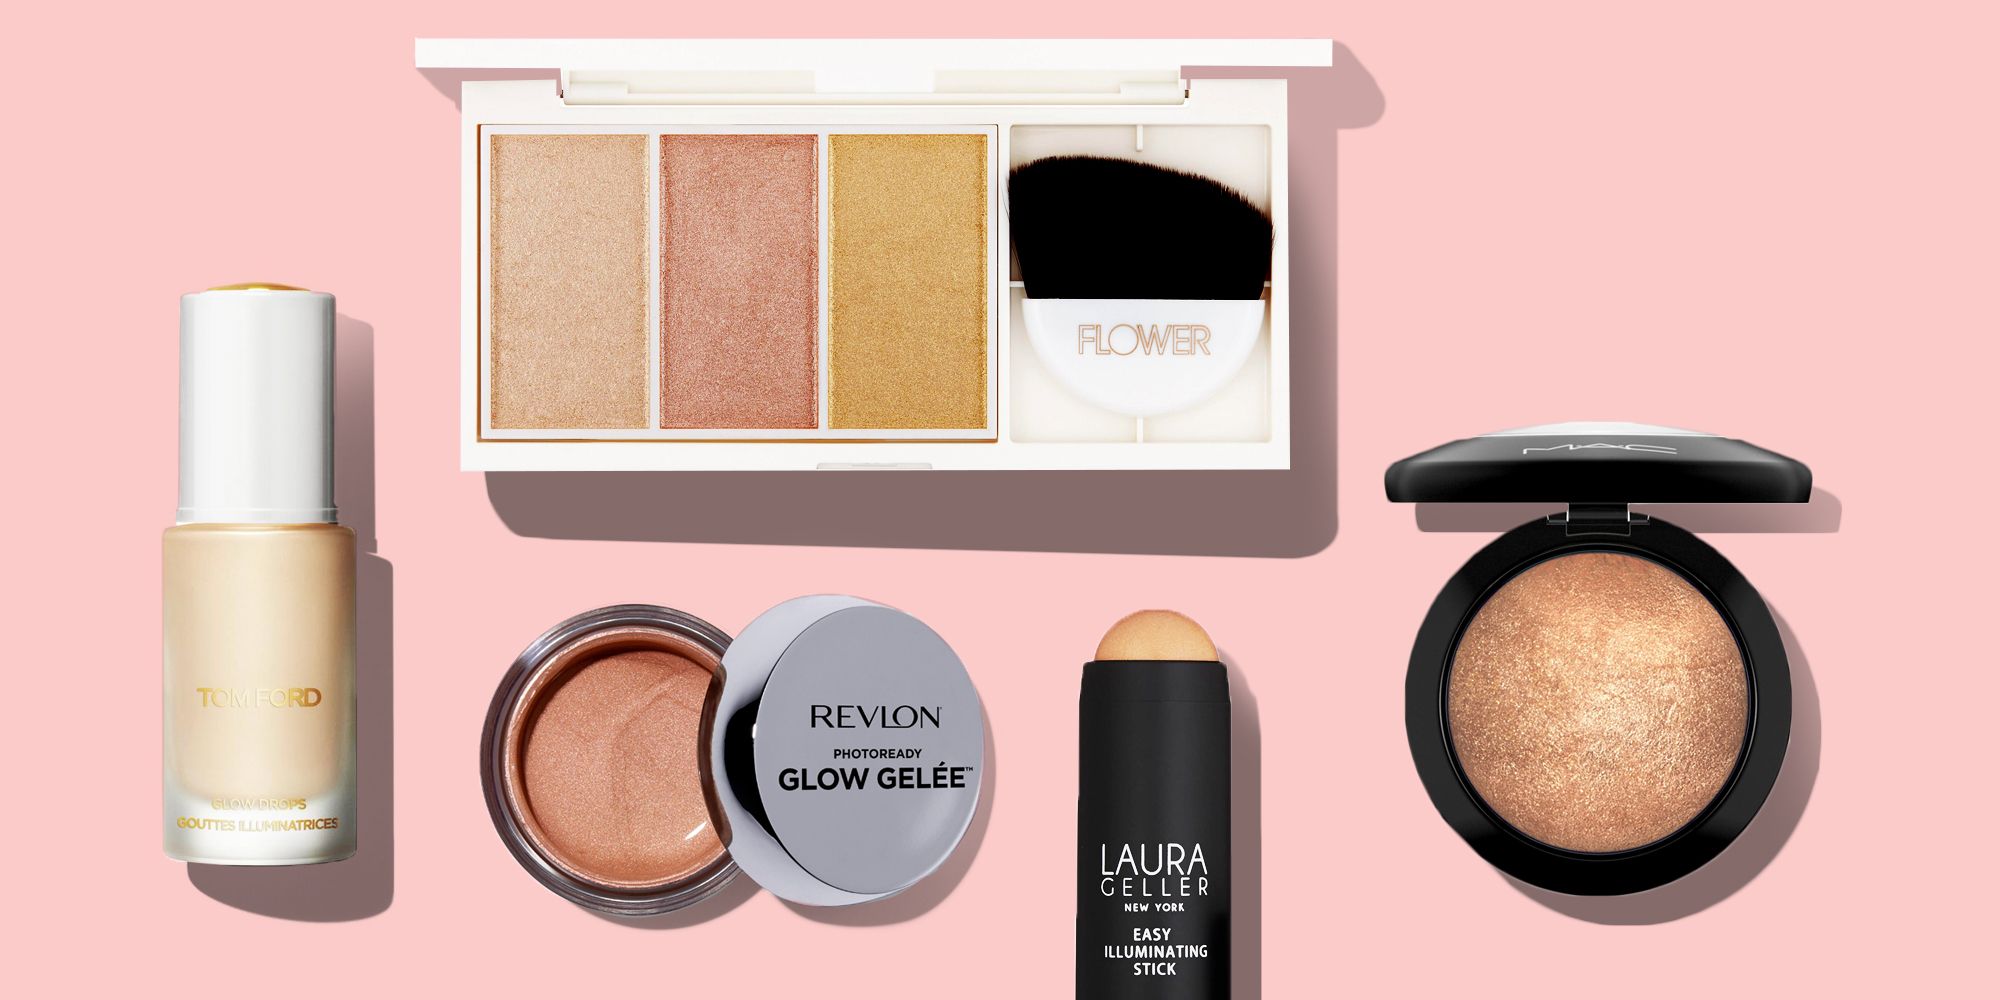 Best Highlighters of 2022 - Top Highlighting Makeup for Face